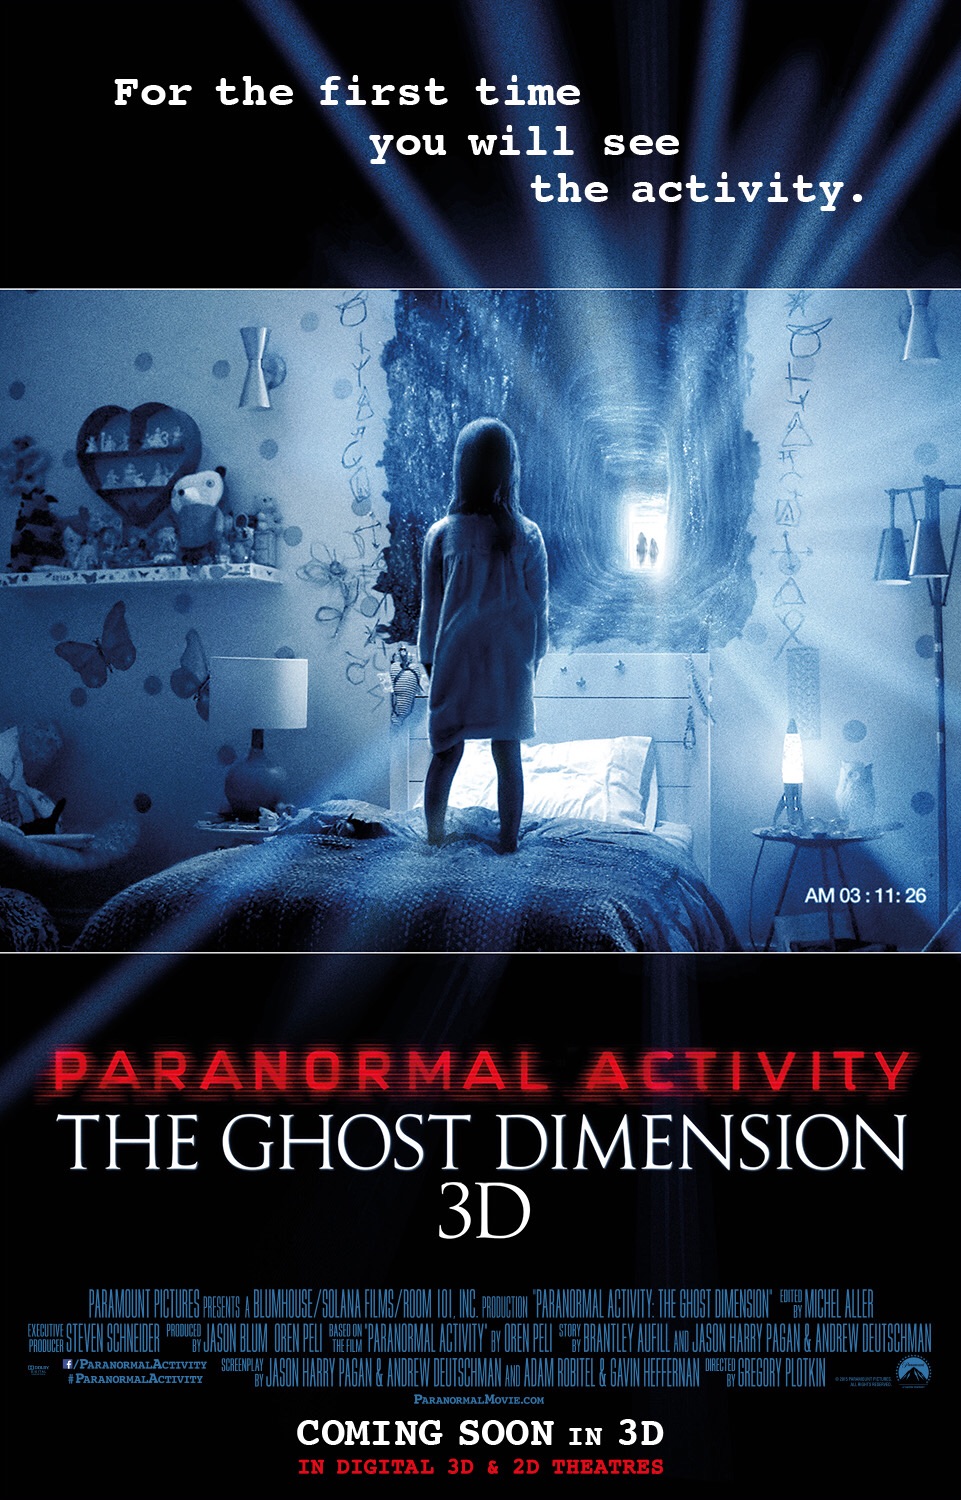 LOOK 'Paranormal Activity The Ghost Dimension' poster revealed